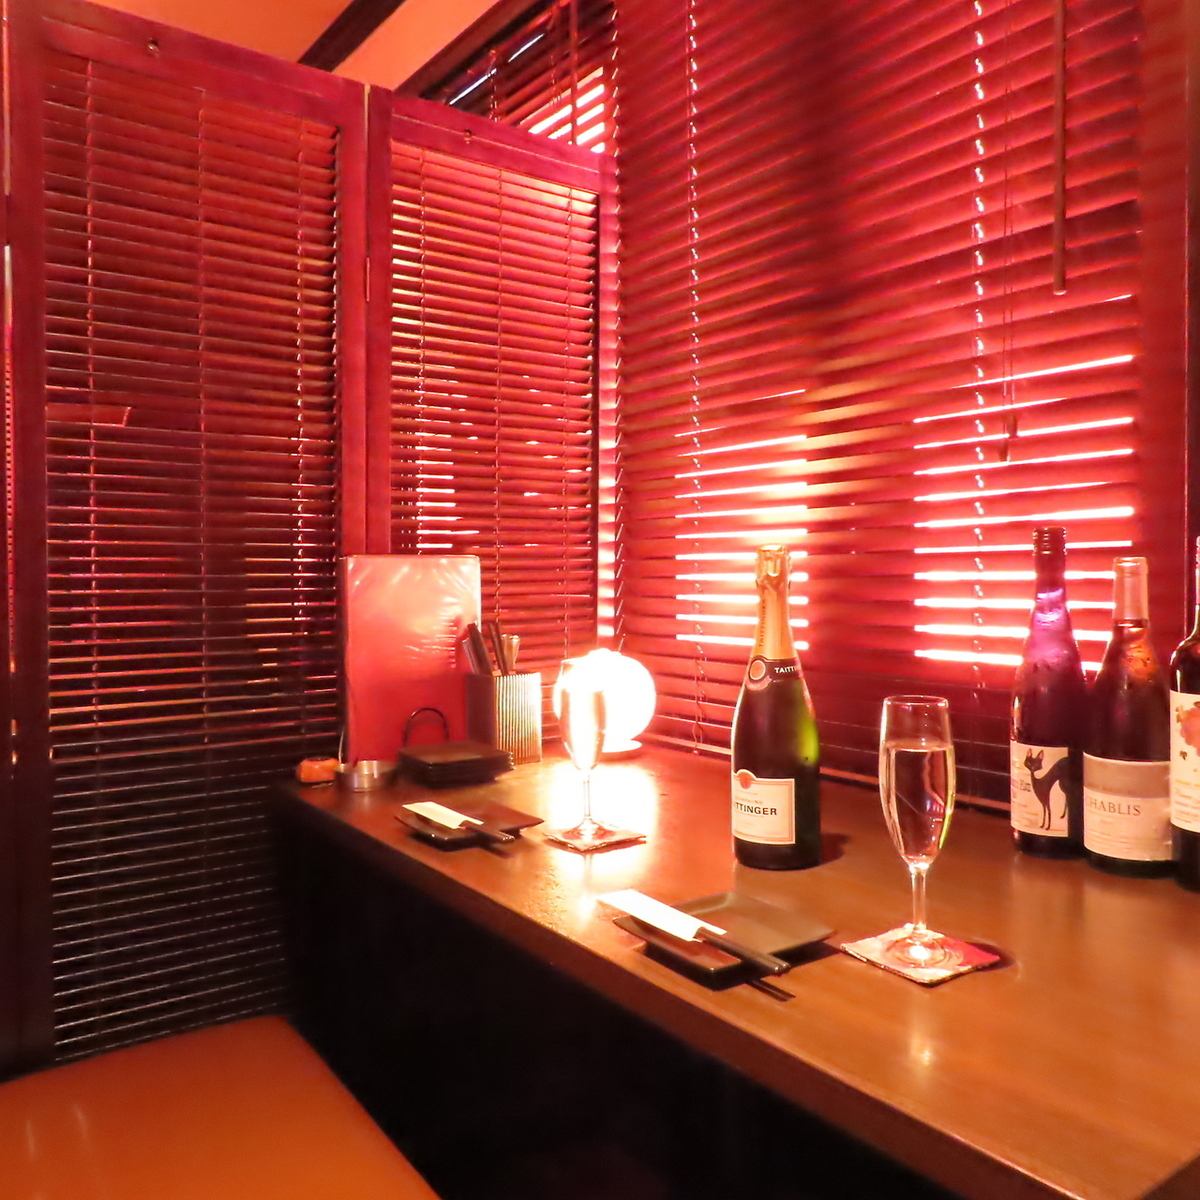 A private room for two is perfect for an adult date...Please make your reservation early as it is popular.